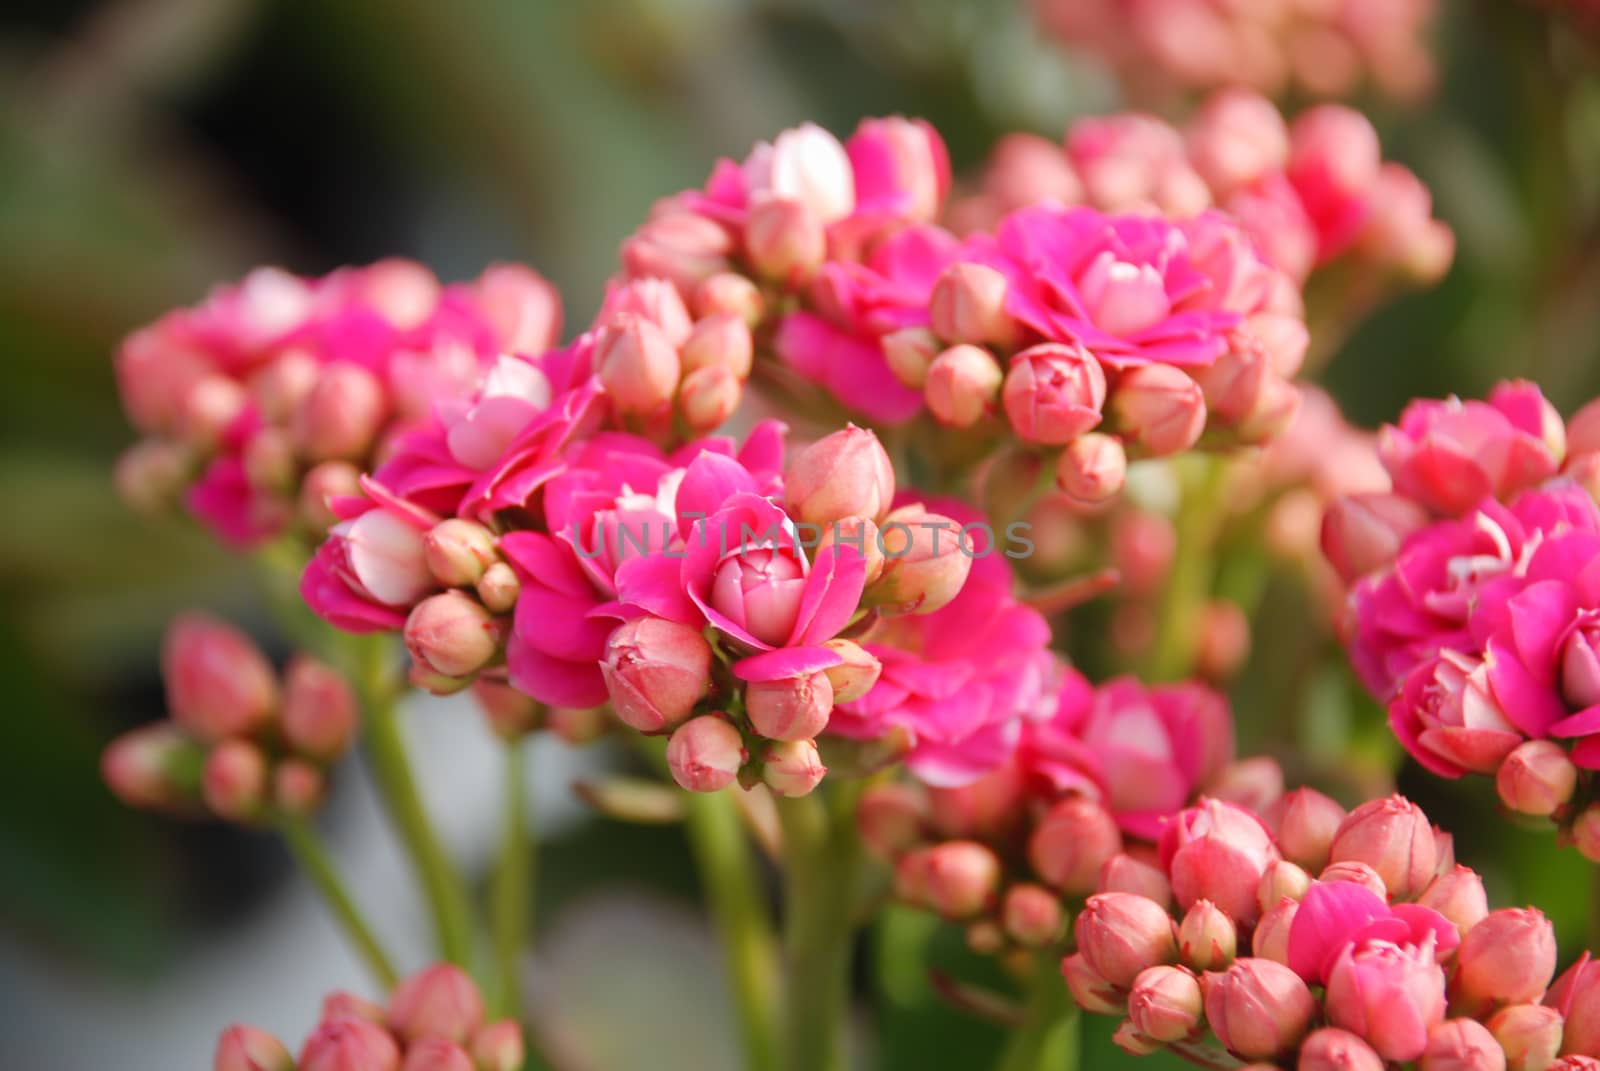 Kalanchoe plant with pink flowers, Kalanchoe blossfeldiana by yuiyuize